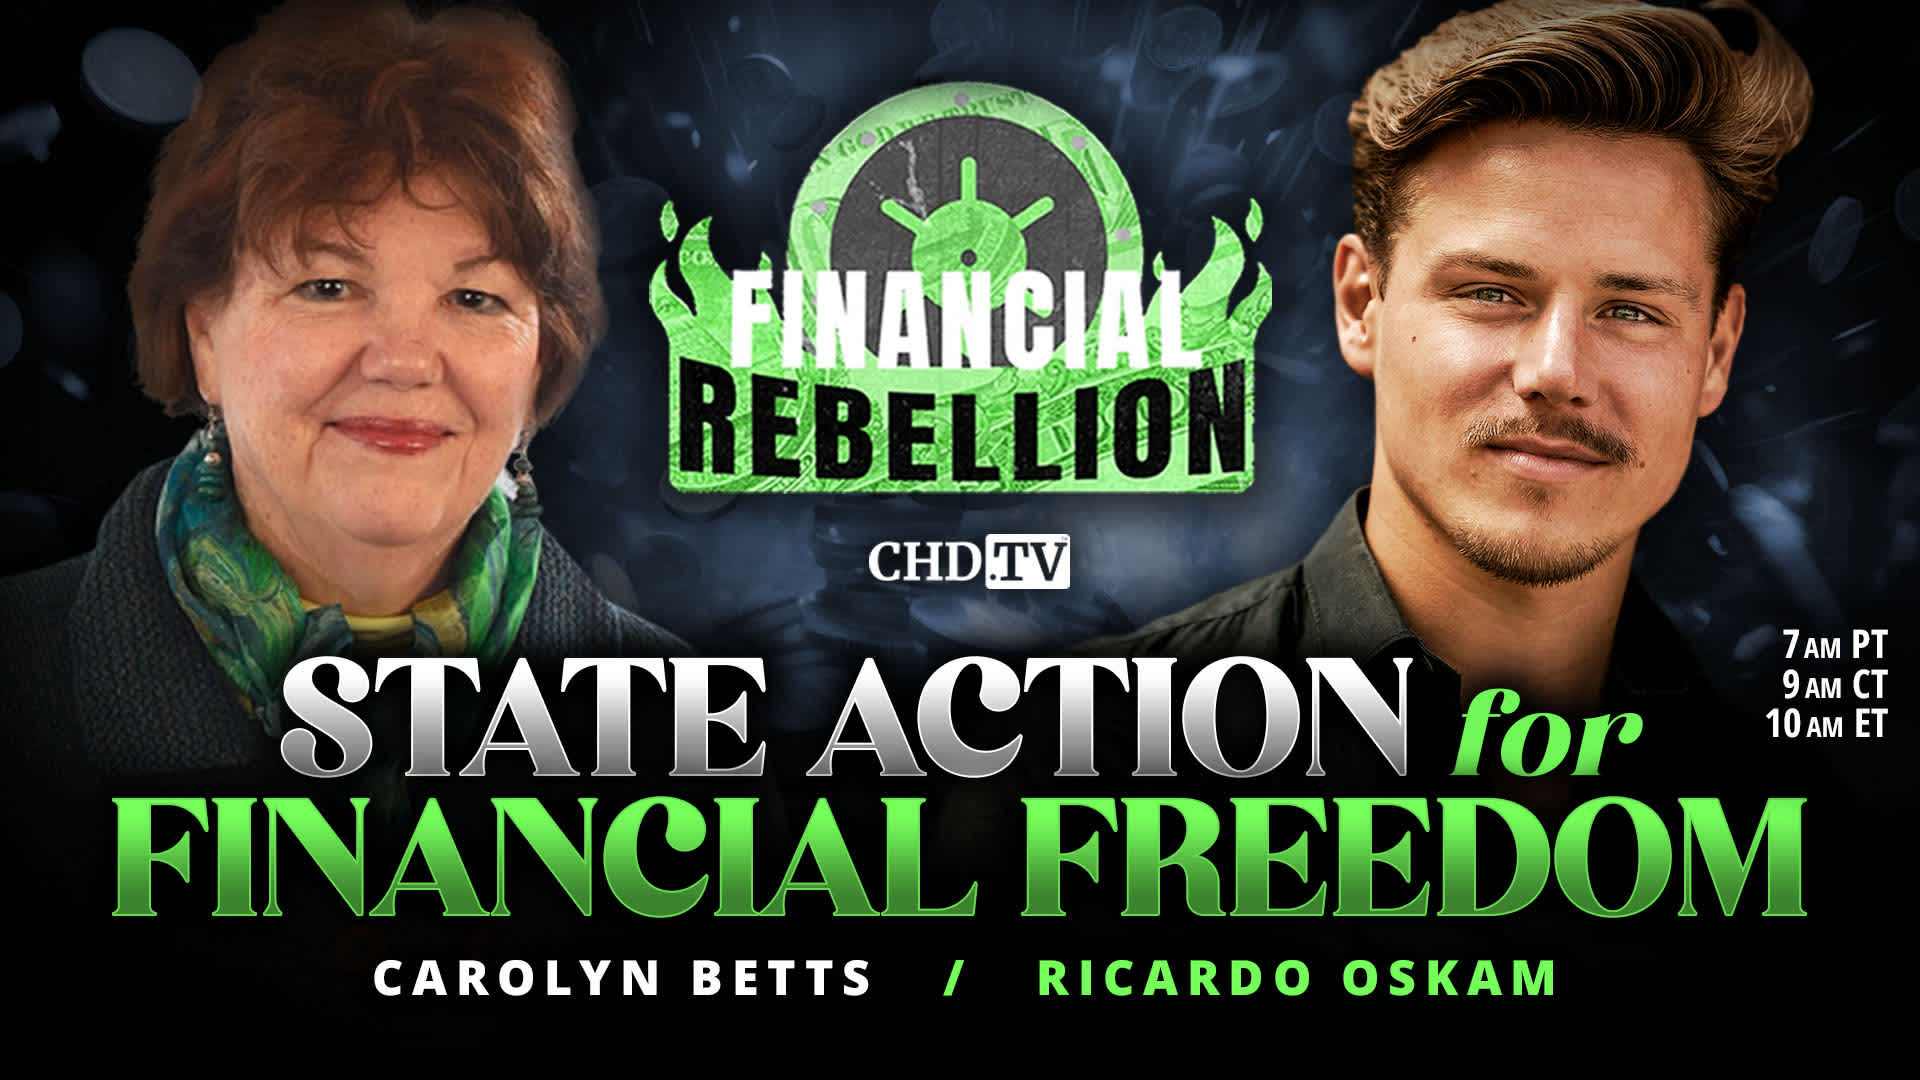 State Action for Financial Freedom